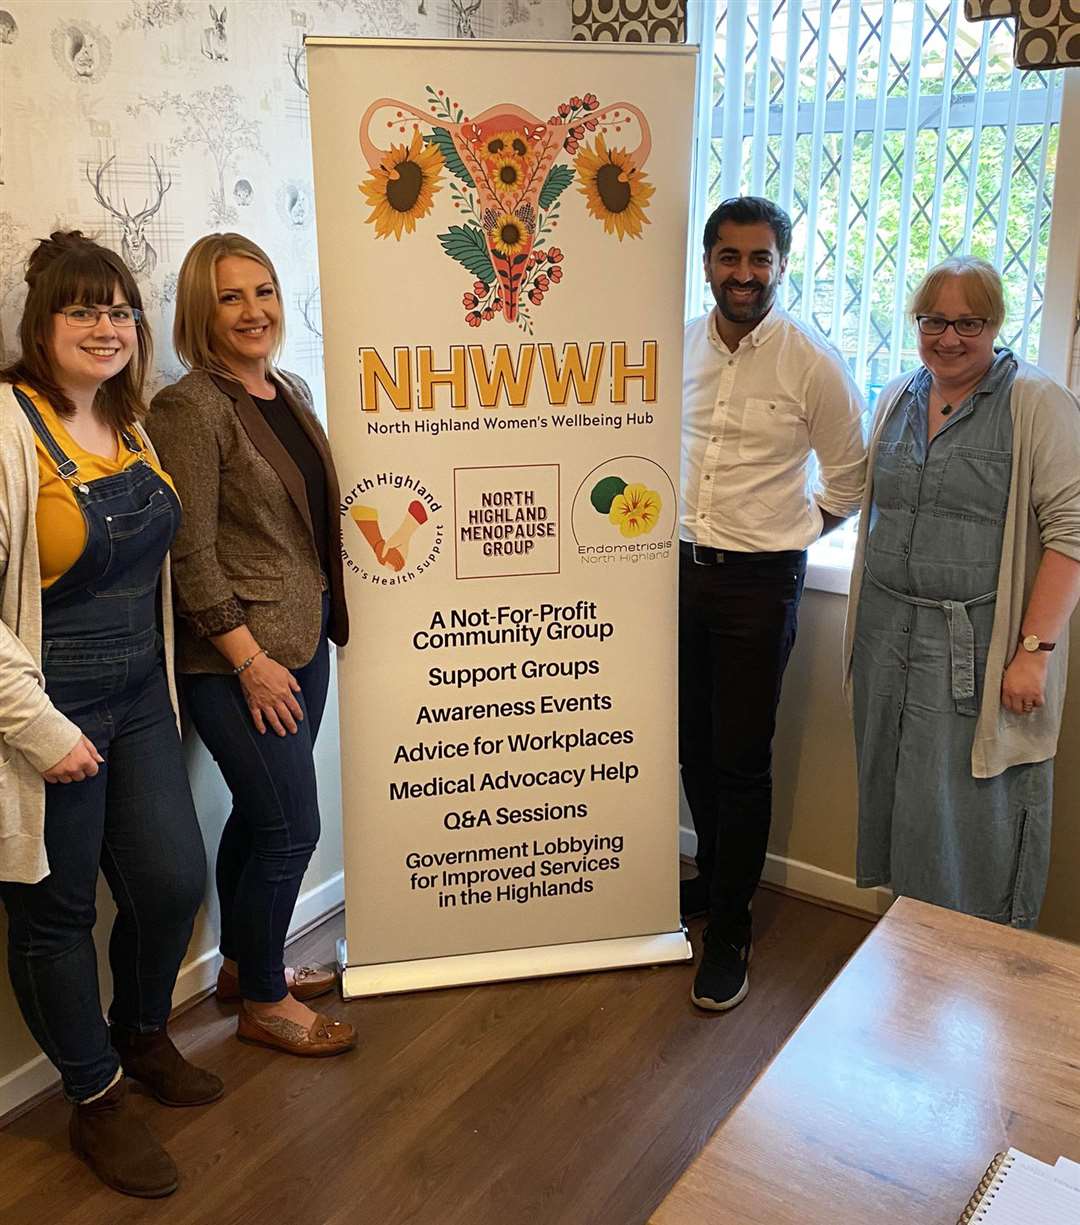 Humza Yousaf in Wick with North Highland Women’s Wellbeing Hub representatives (from left) Rebecca Wymer, Claire Clark and Kirsteen Campbell.